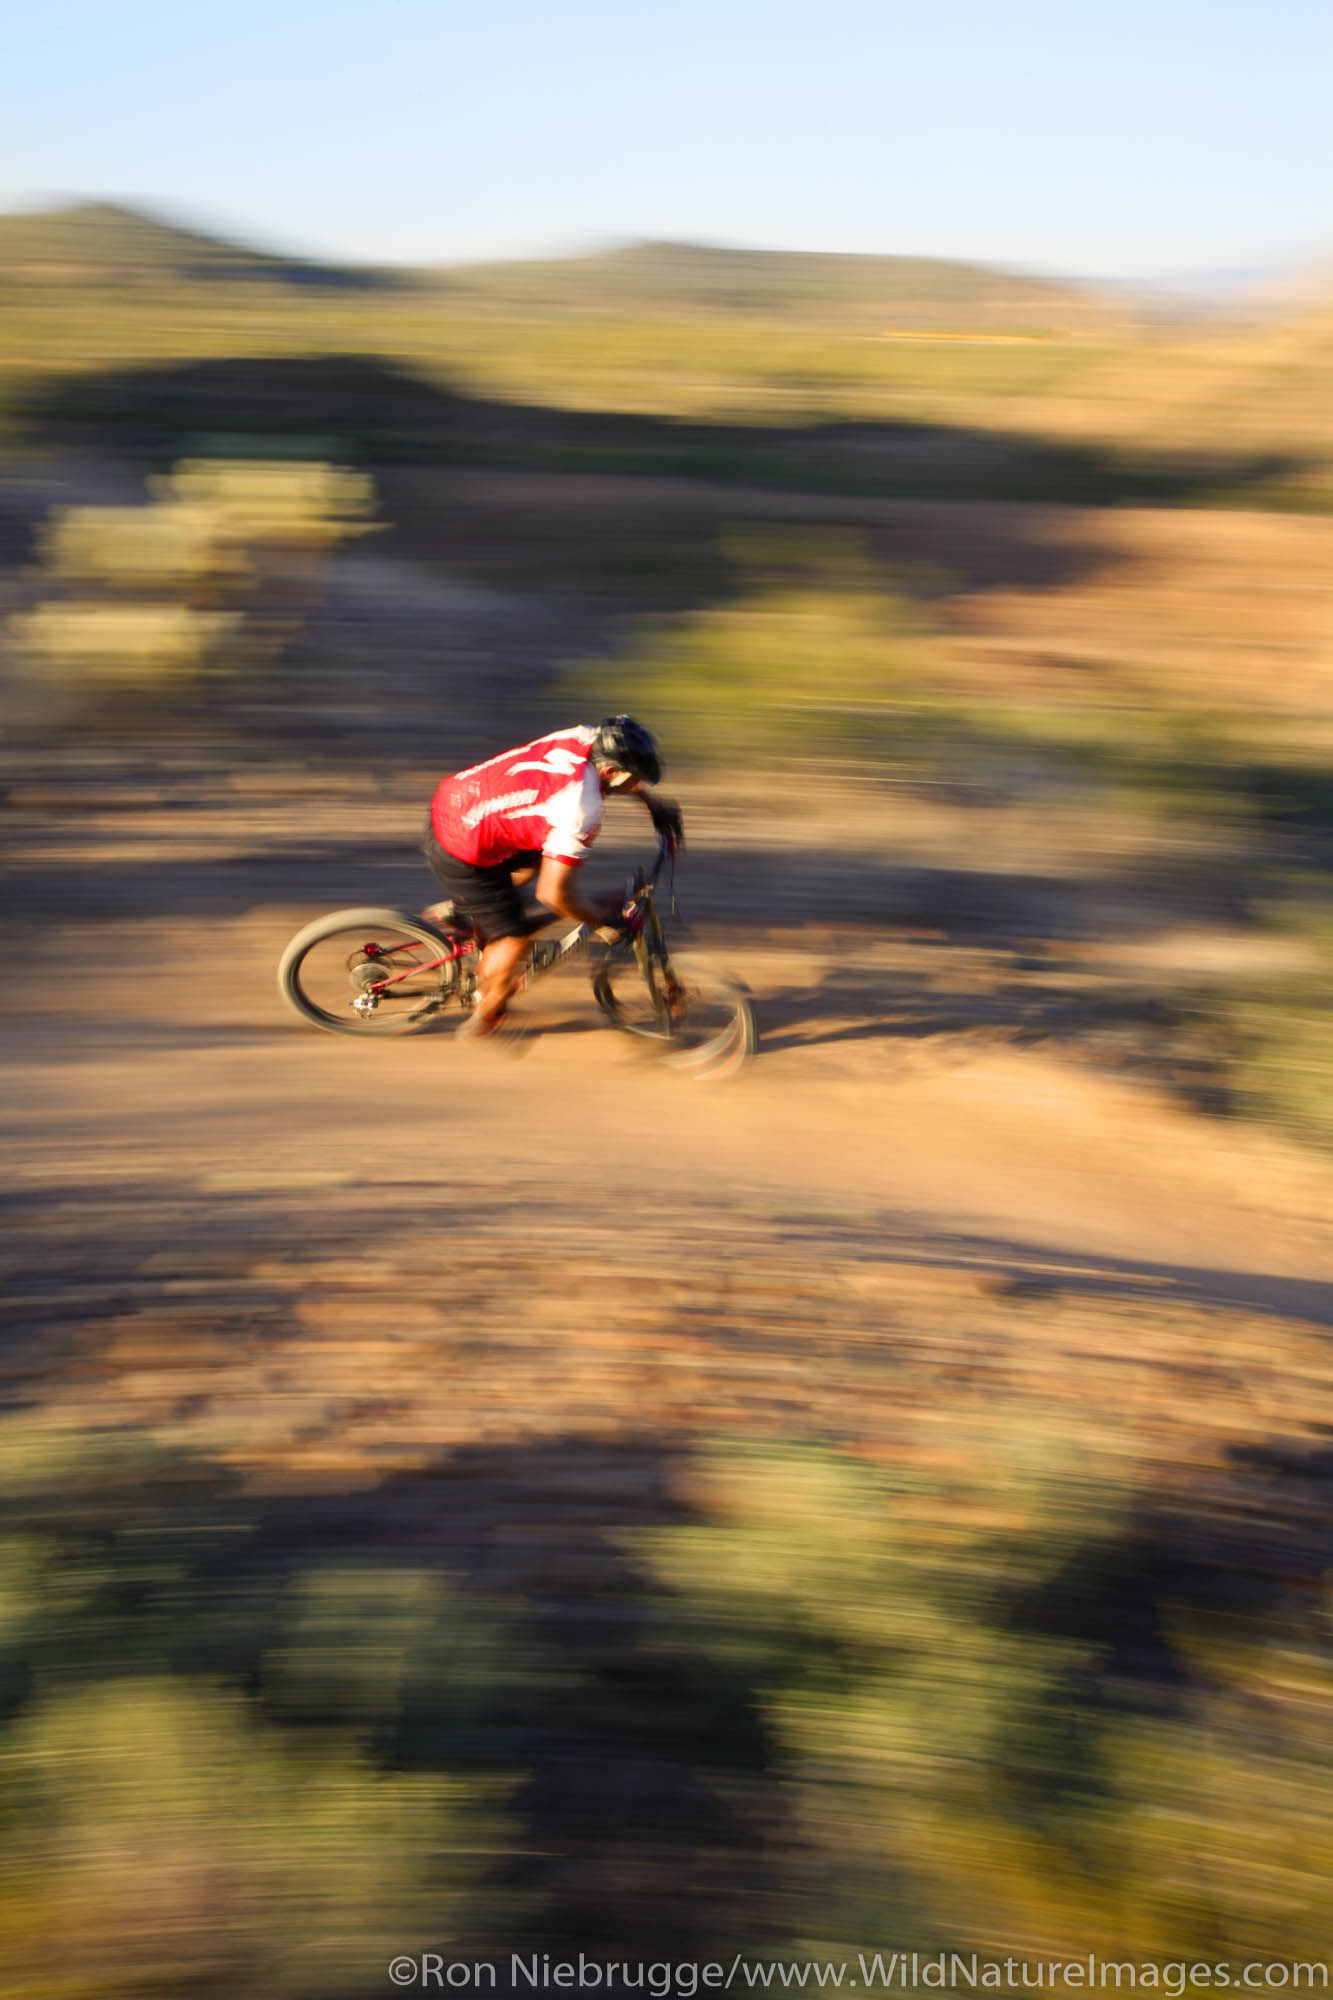 A mountain biker on the Technical Loop, one of the competitive race tracks at McDowell Mountain Regional Park near Phoenix, Ariziona...